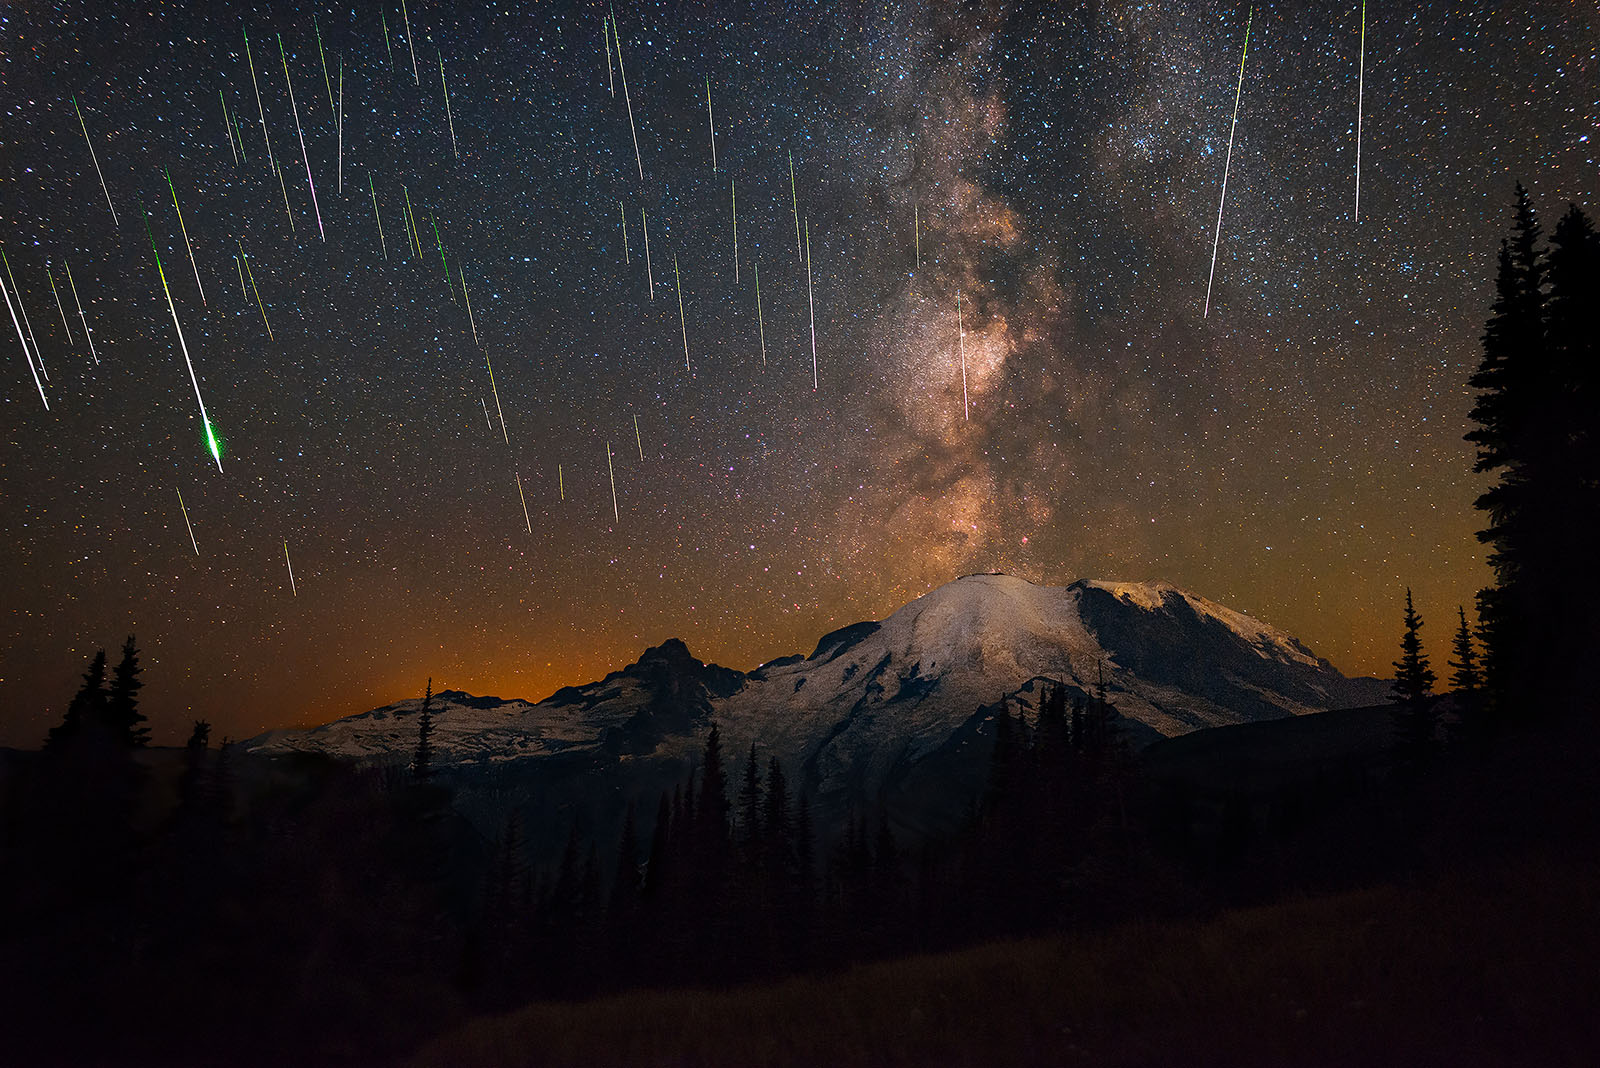 This Photo Shows Perseid Meteors and the Milky Way 'Erupting' Over